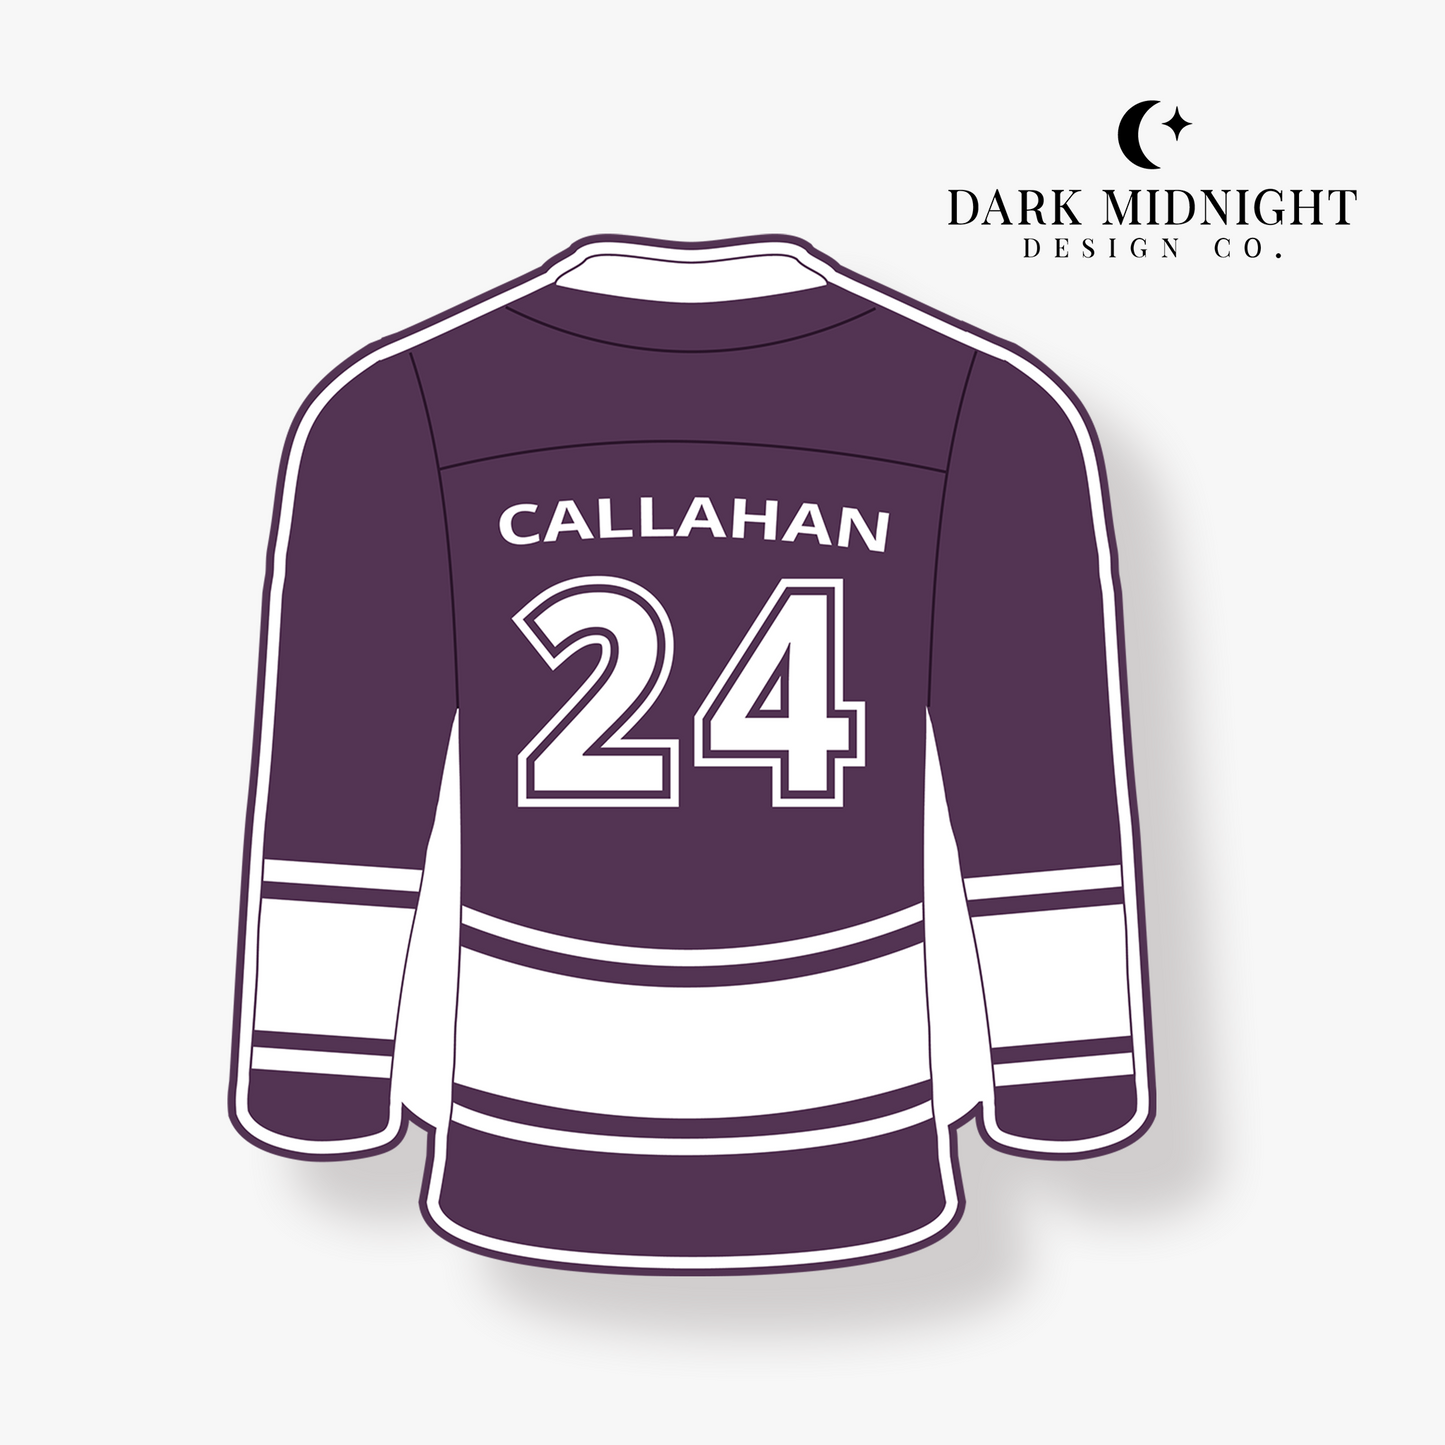 Cooper Callahan Jersey Sticker - Officially Licensed Beyond The Play Series